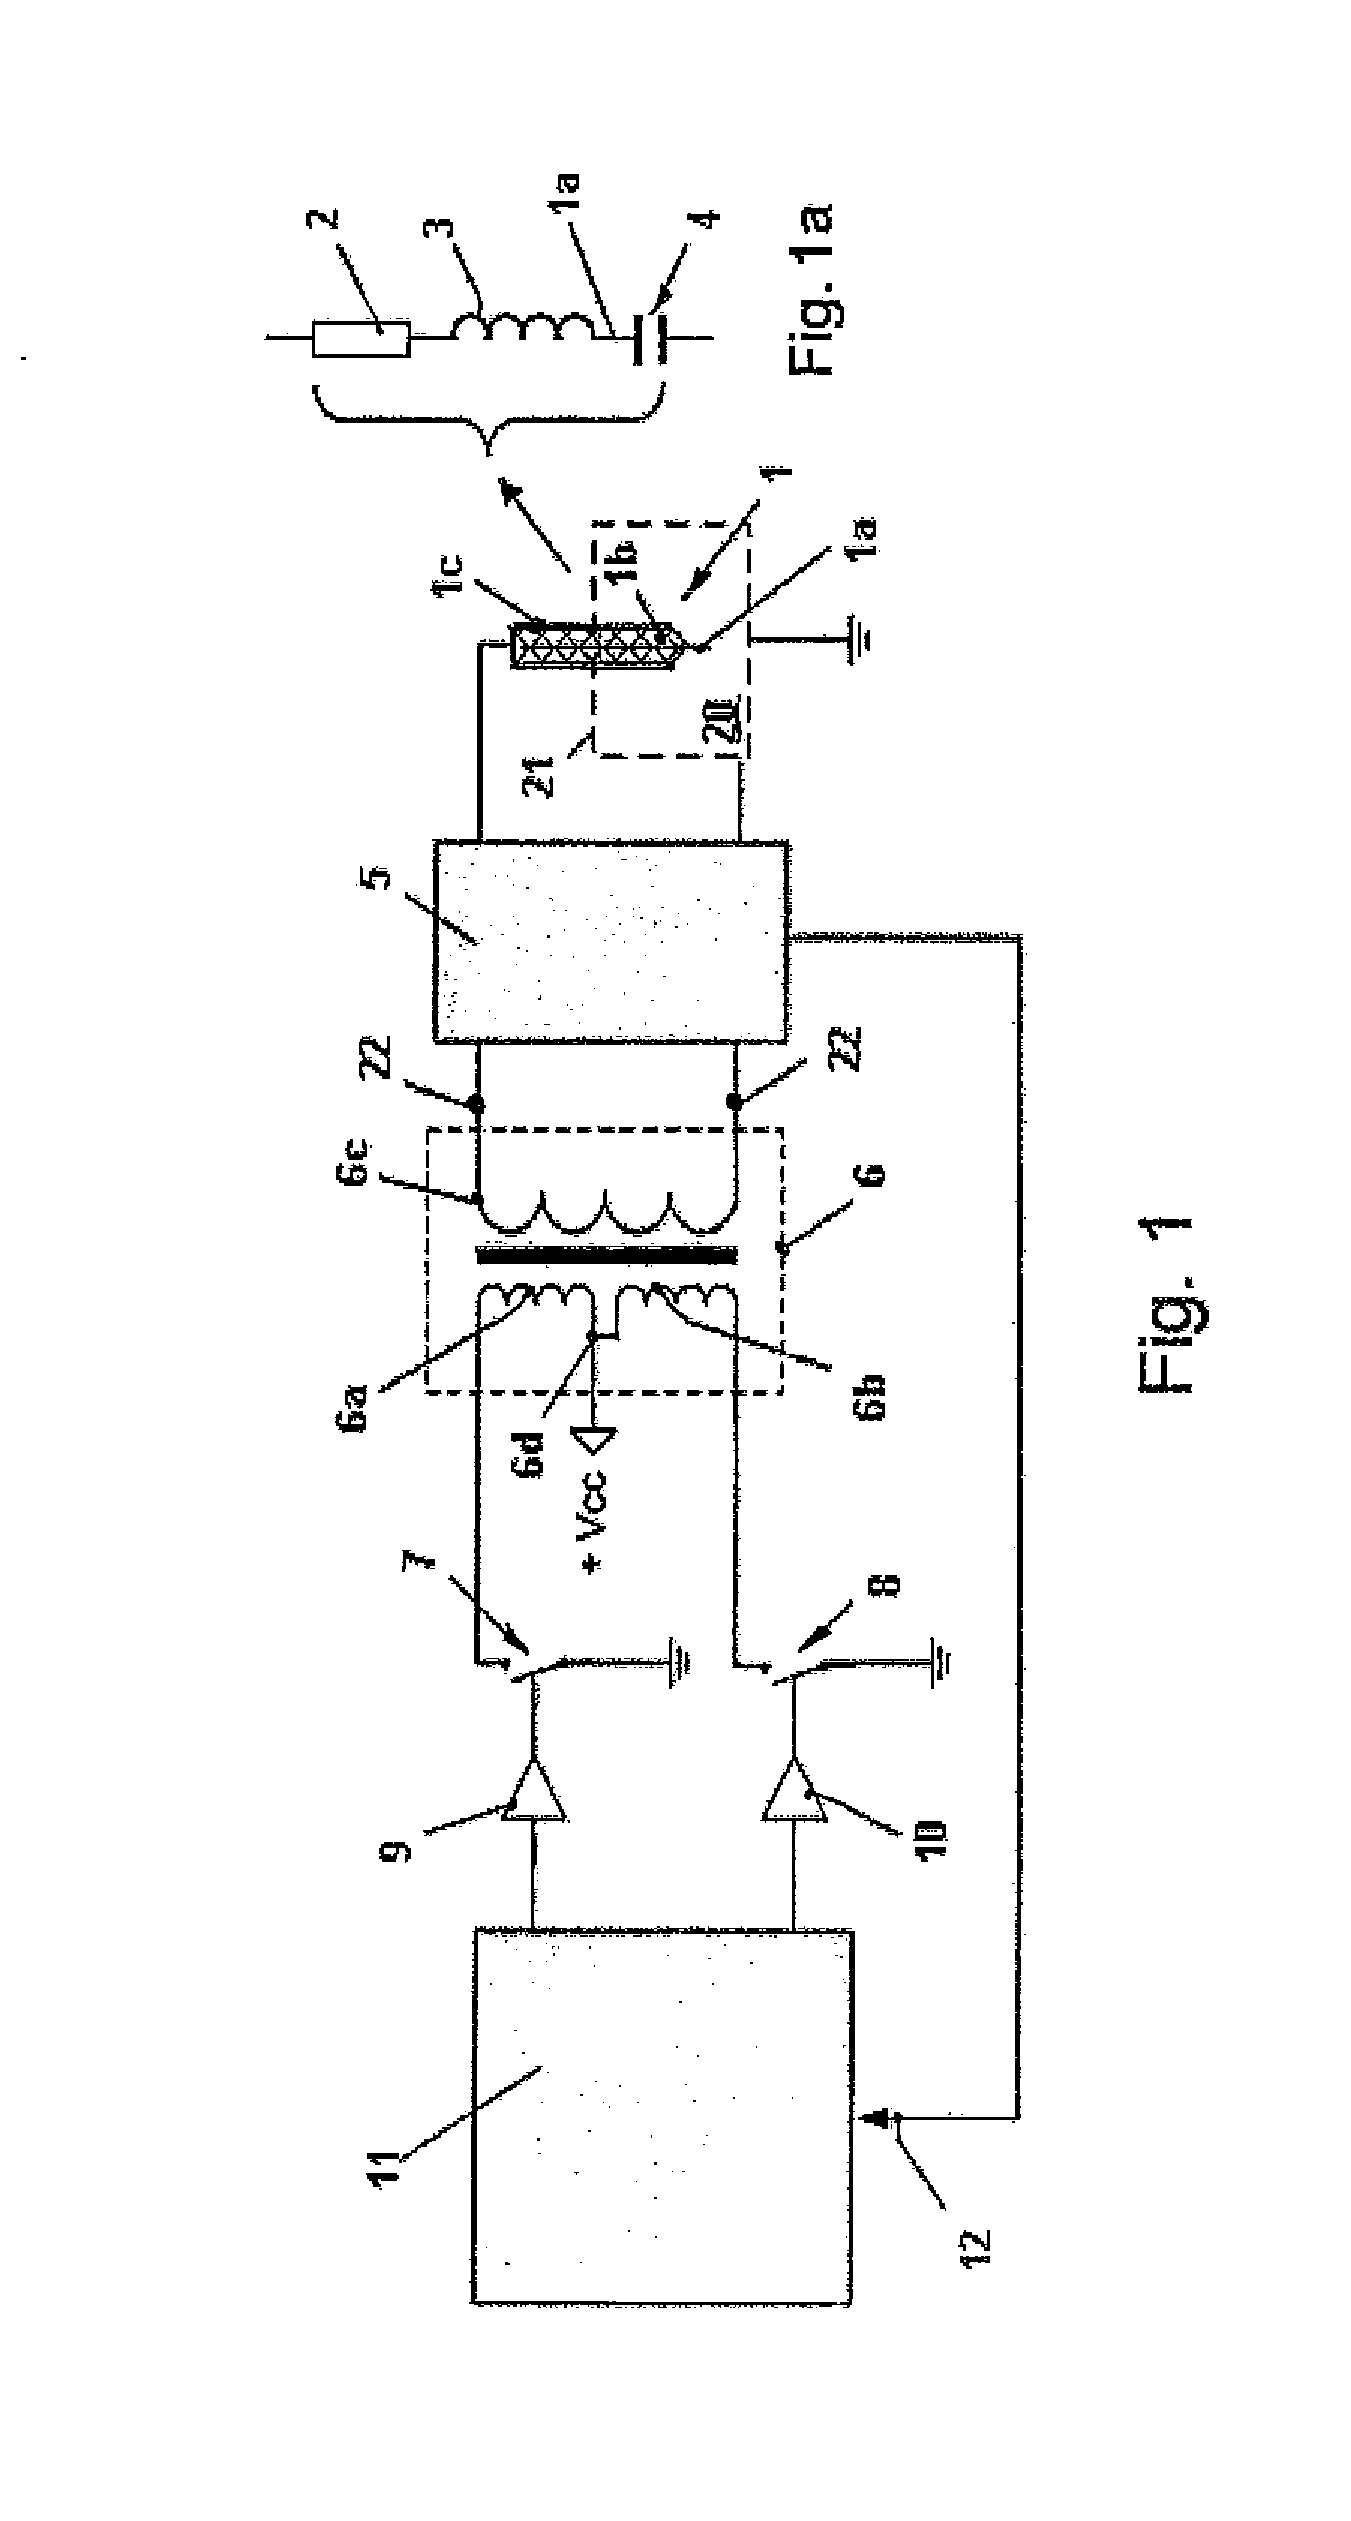 Method for energizing an HF resonant circuit which has an igniter as a component for igniting a fuel-air mixture in a combustion chamber